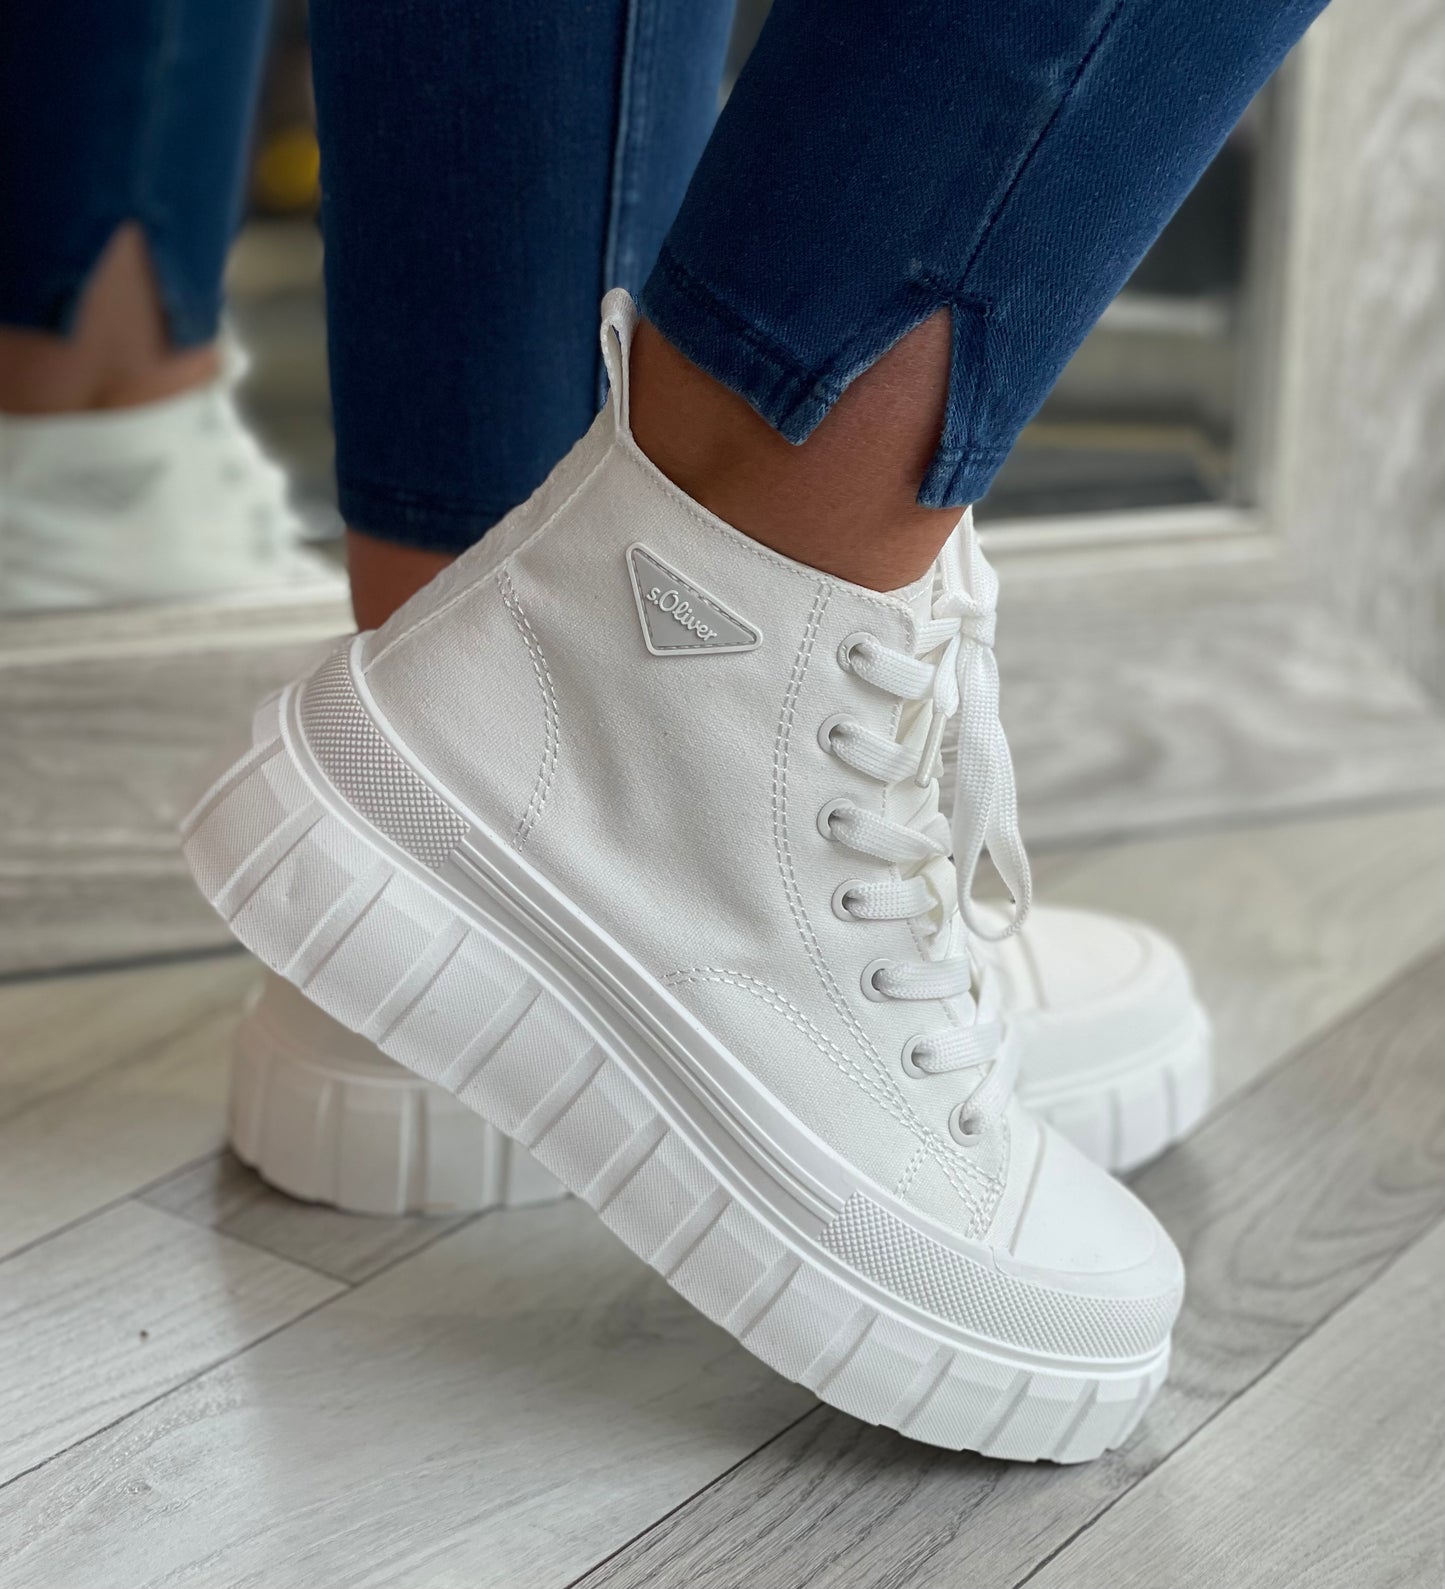 S Oliver - White Canvas High Top Trainer